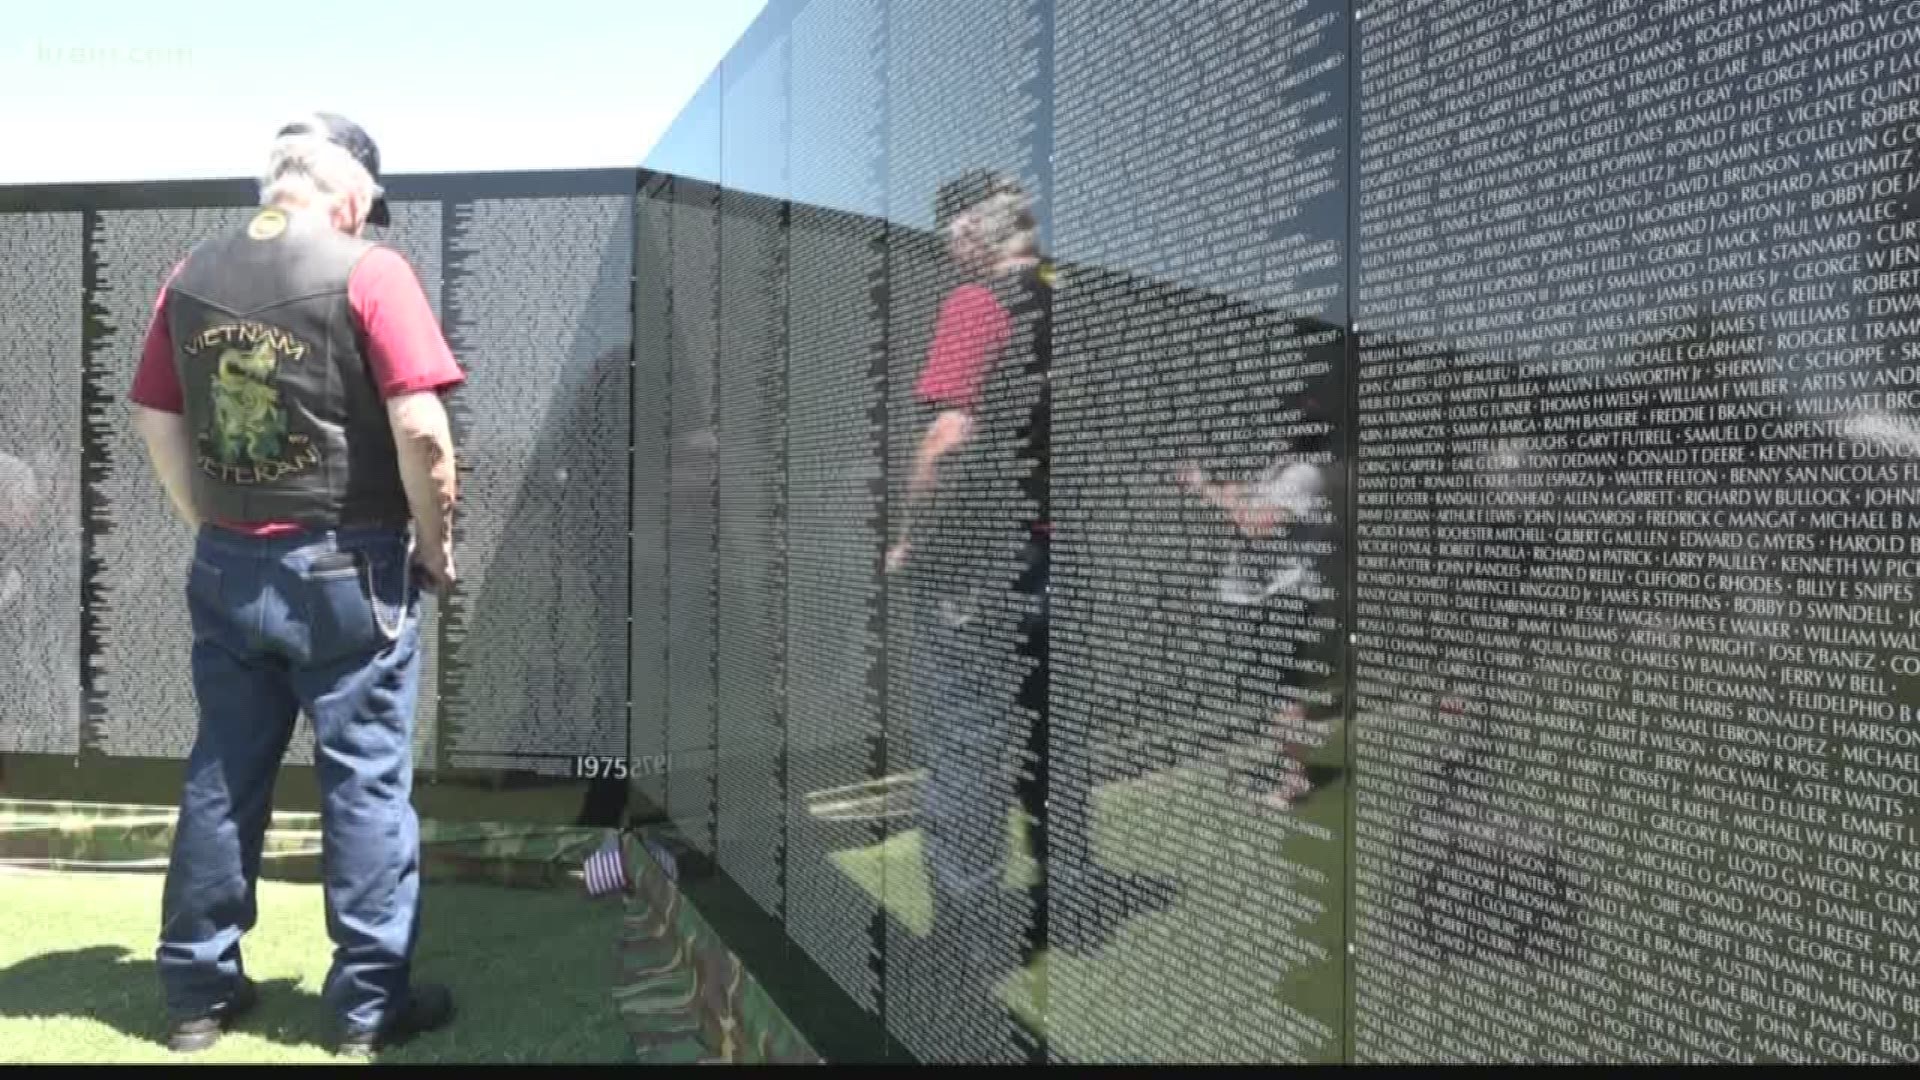 A half-size replica of the Vietnam Veterans Memorial in Washington, D.C. is on display in Medical Lake, Wash., through Monday.